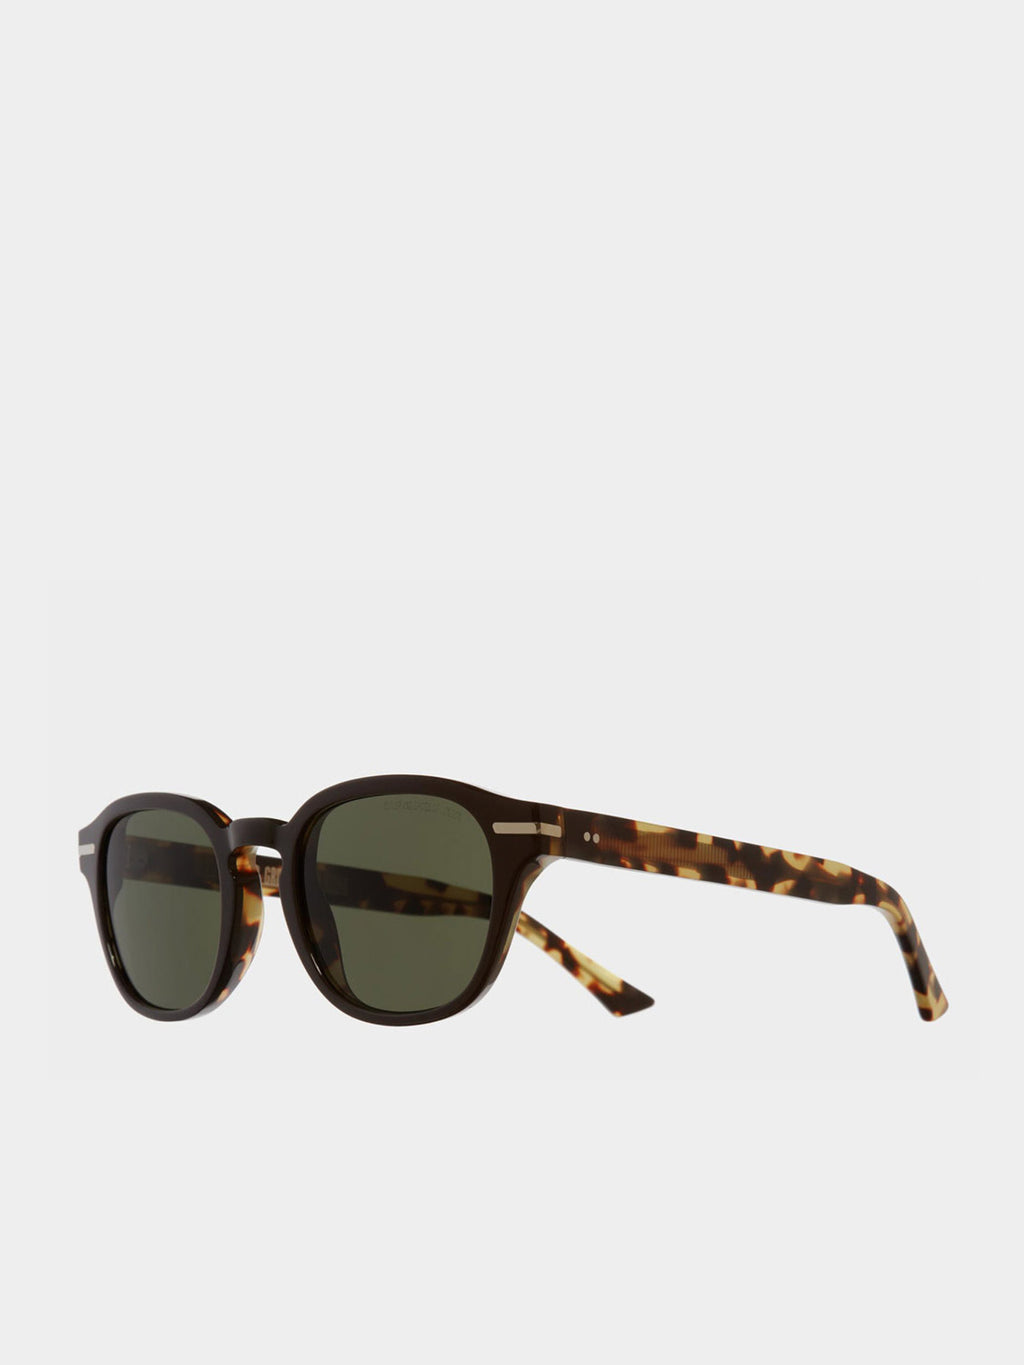 Cutler and Gross Round-Frame Black Taxi and Camo Acetate Sunglasses | B